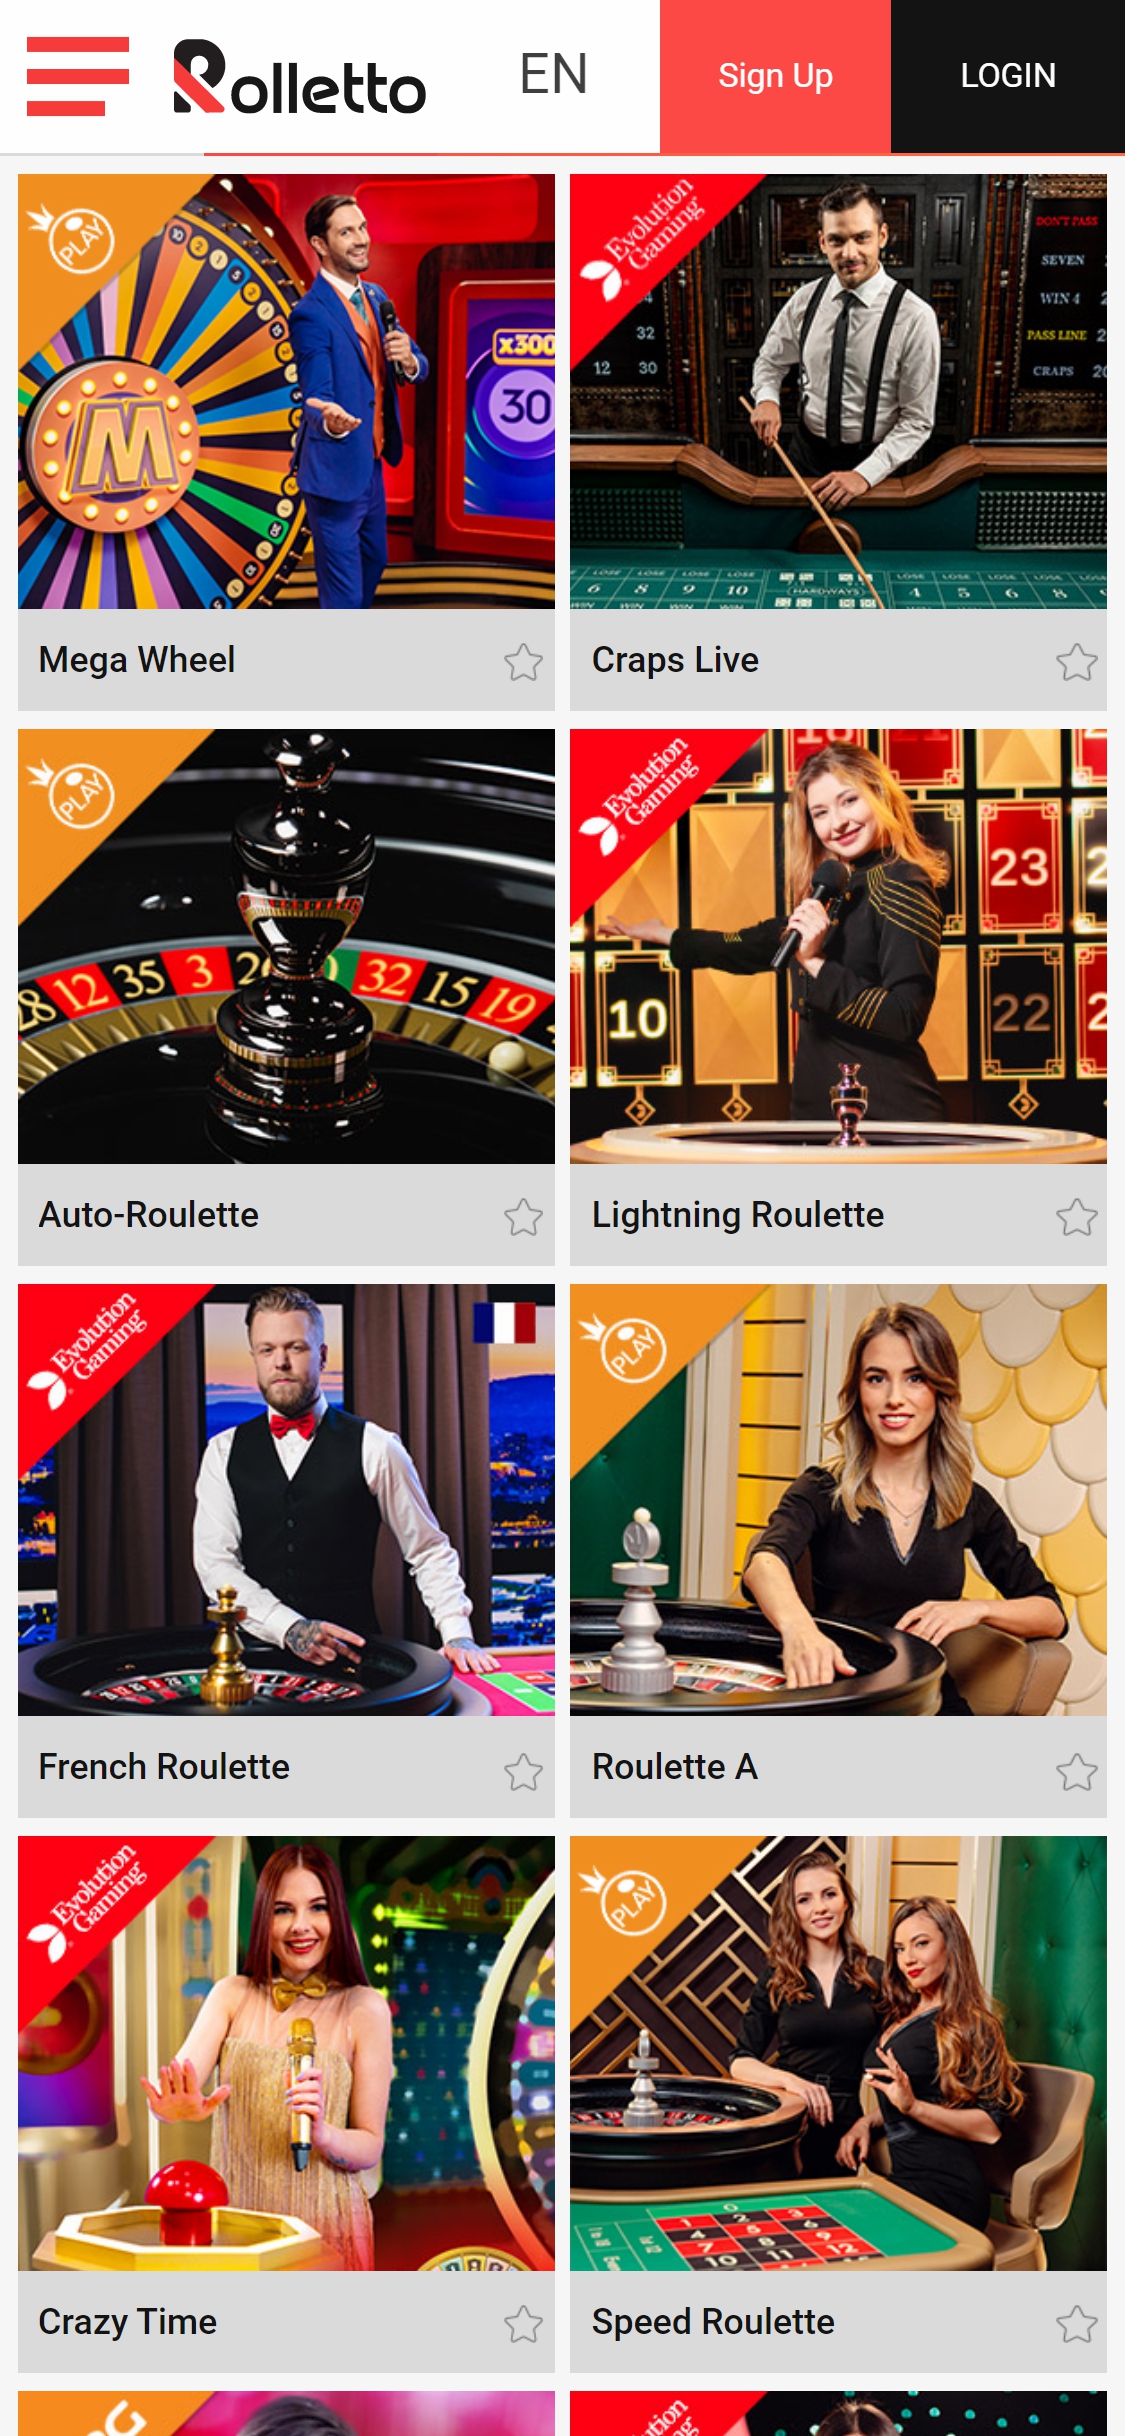 Rolletto Casino Mobile Live Dealer Games Review